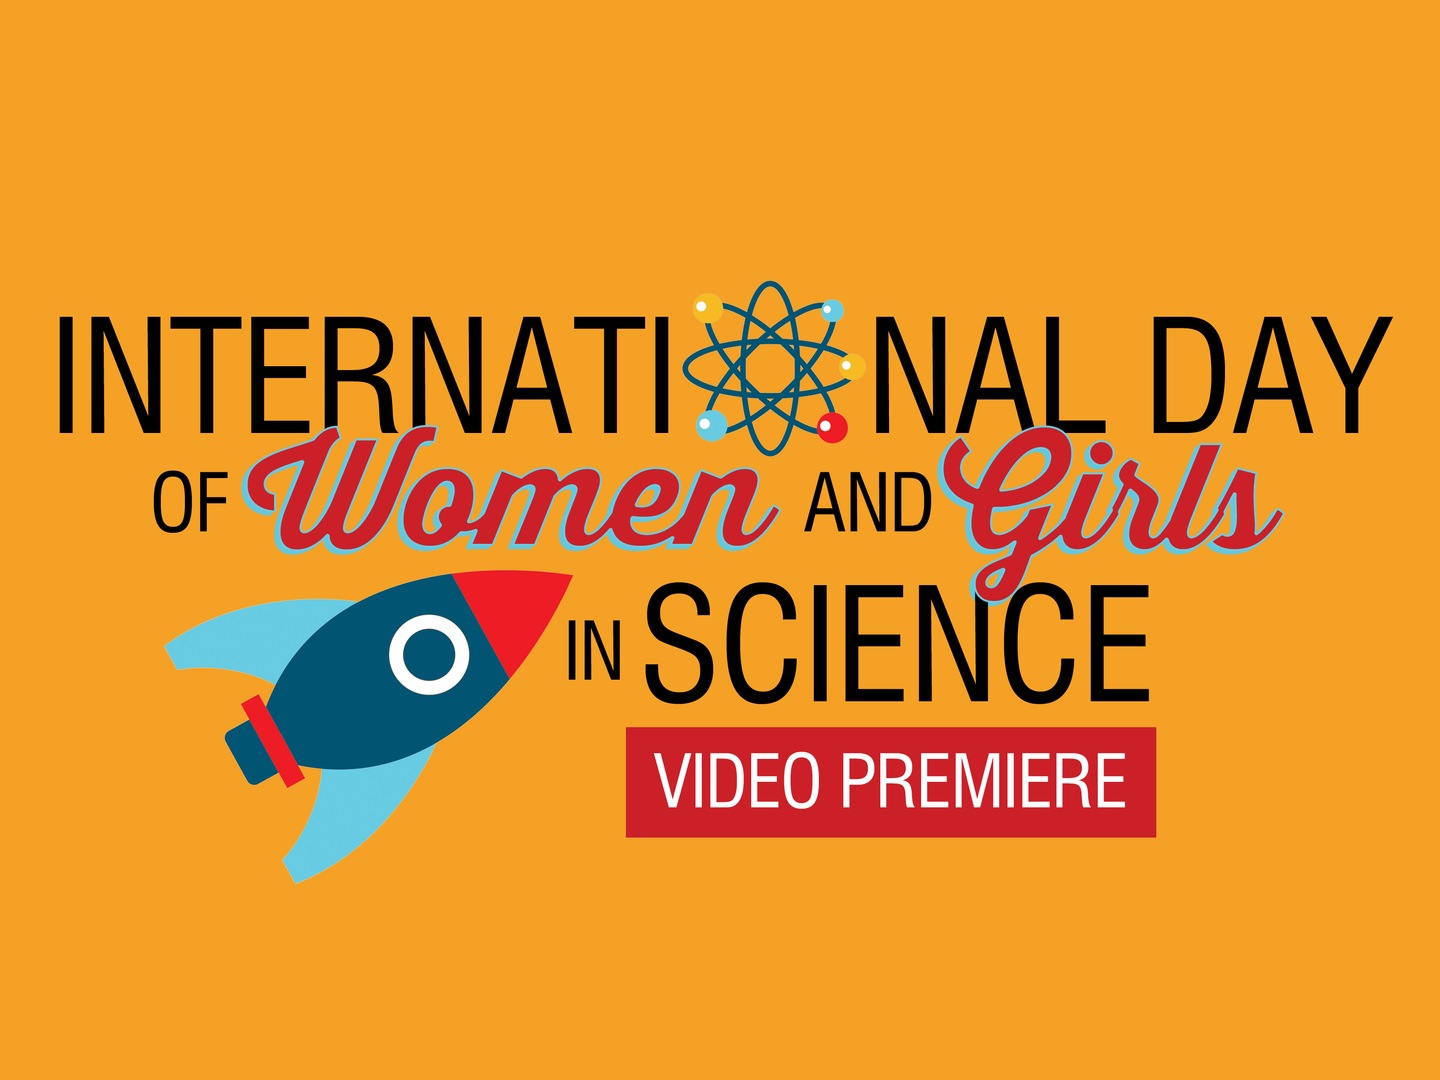 Video Premiere International Day Of Women And Girls In Science The Future Of Life In Space